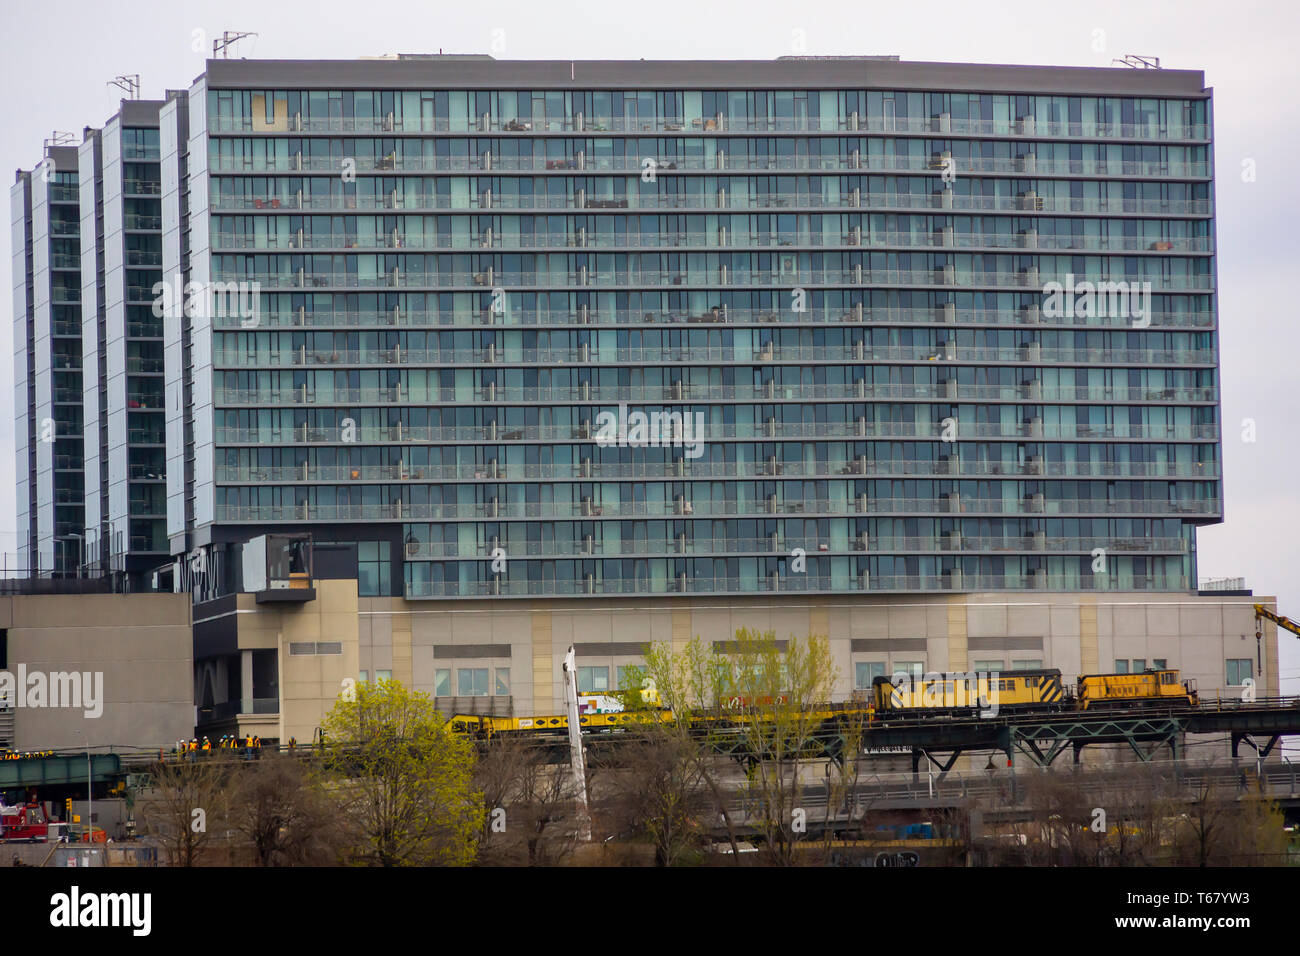 Skyview Plaza condominiums and shopping mall next to Flushing Creek in the Flushing neighborhood of Queens in New York on Saturday, April 20, 2019. (Â© Richard B. Levine) Stock Photo